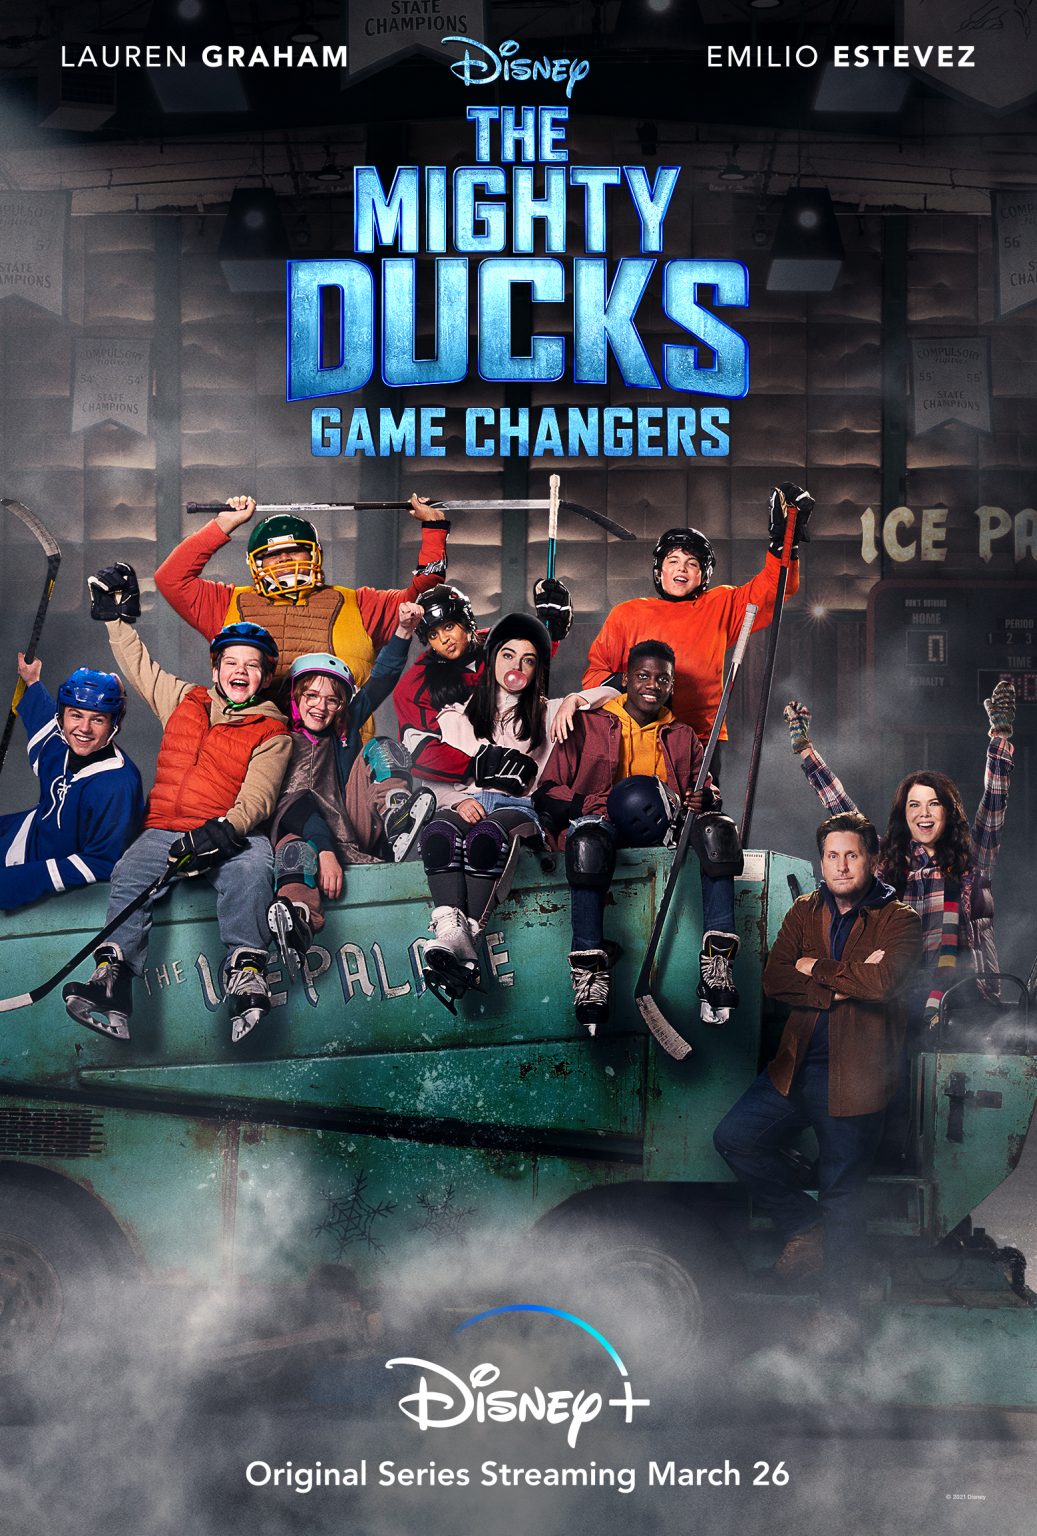 VIDEO Disney's 'The Mighty Ducks Game Changers' Trailer Is Out Now